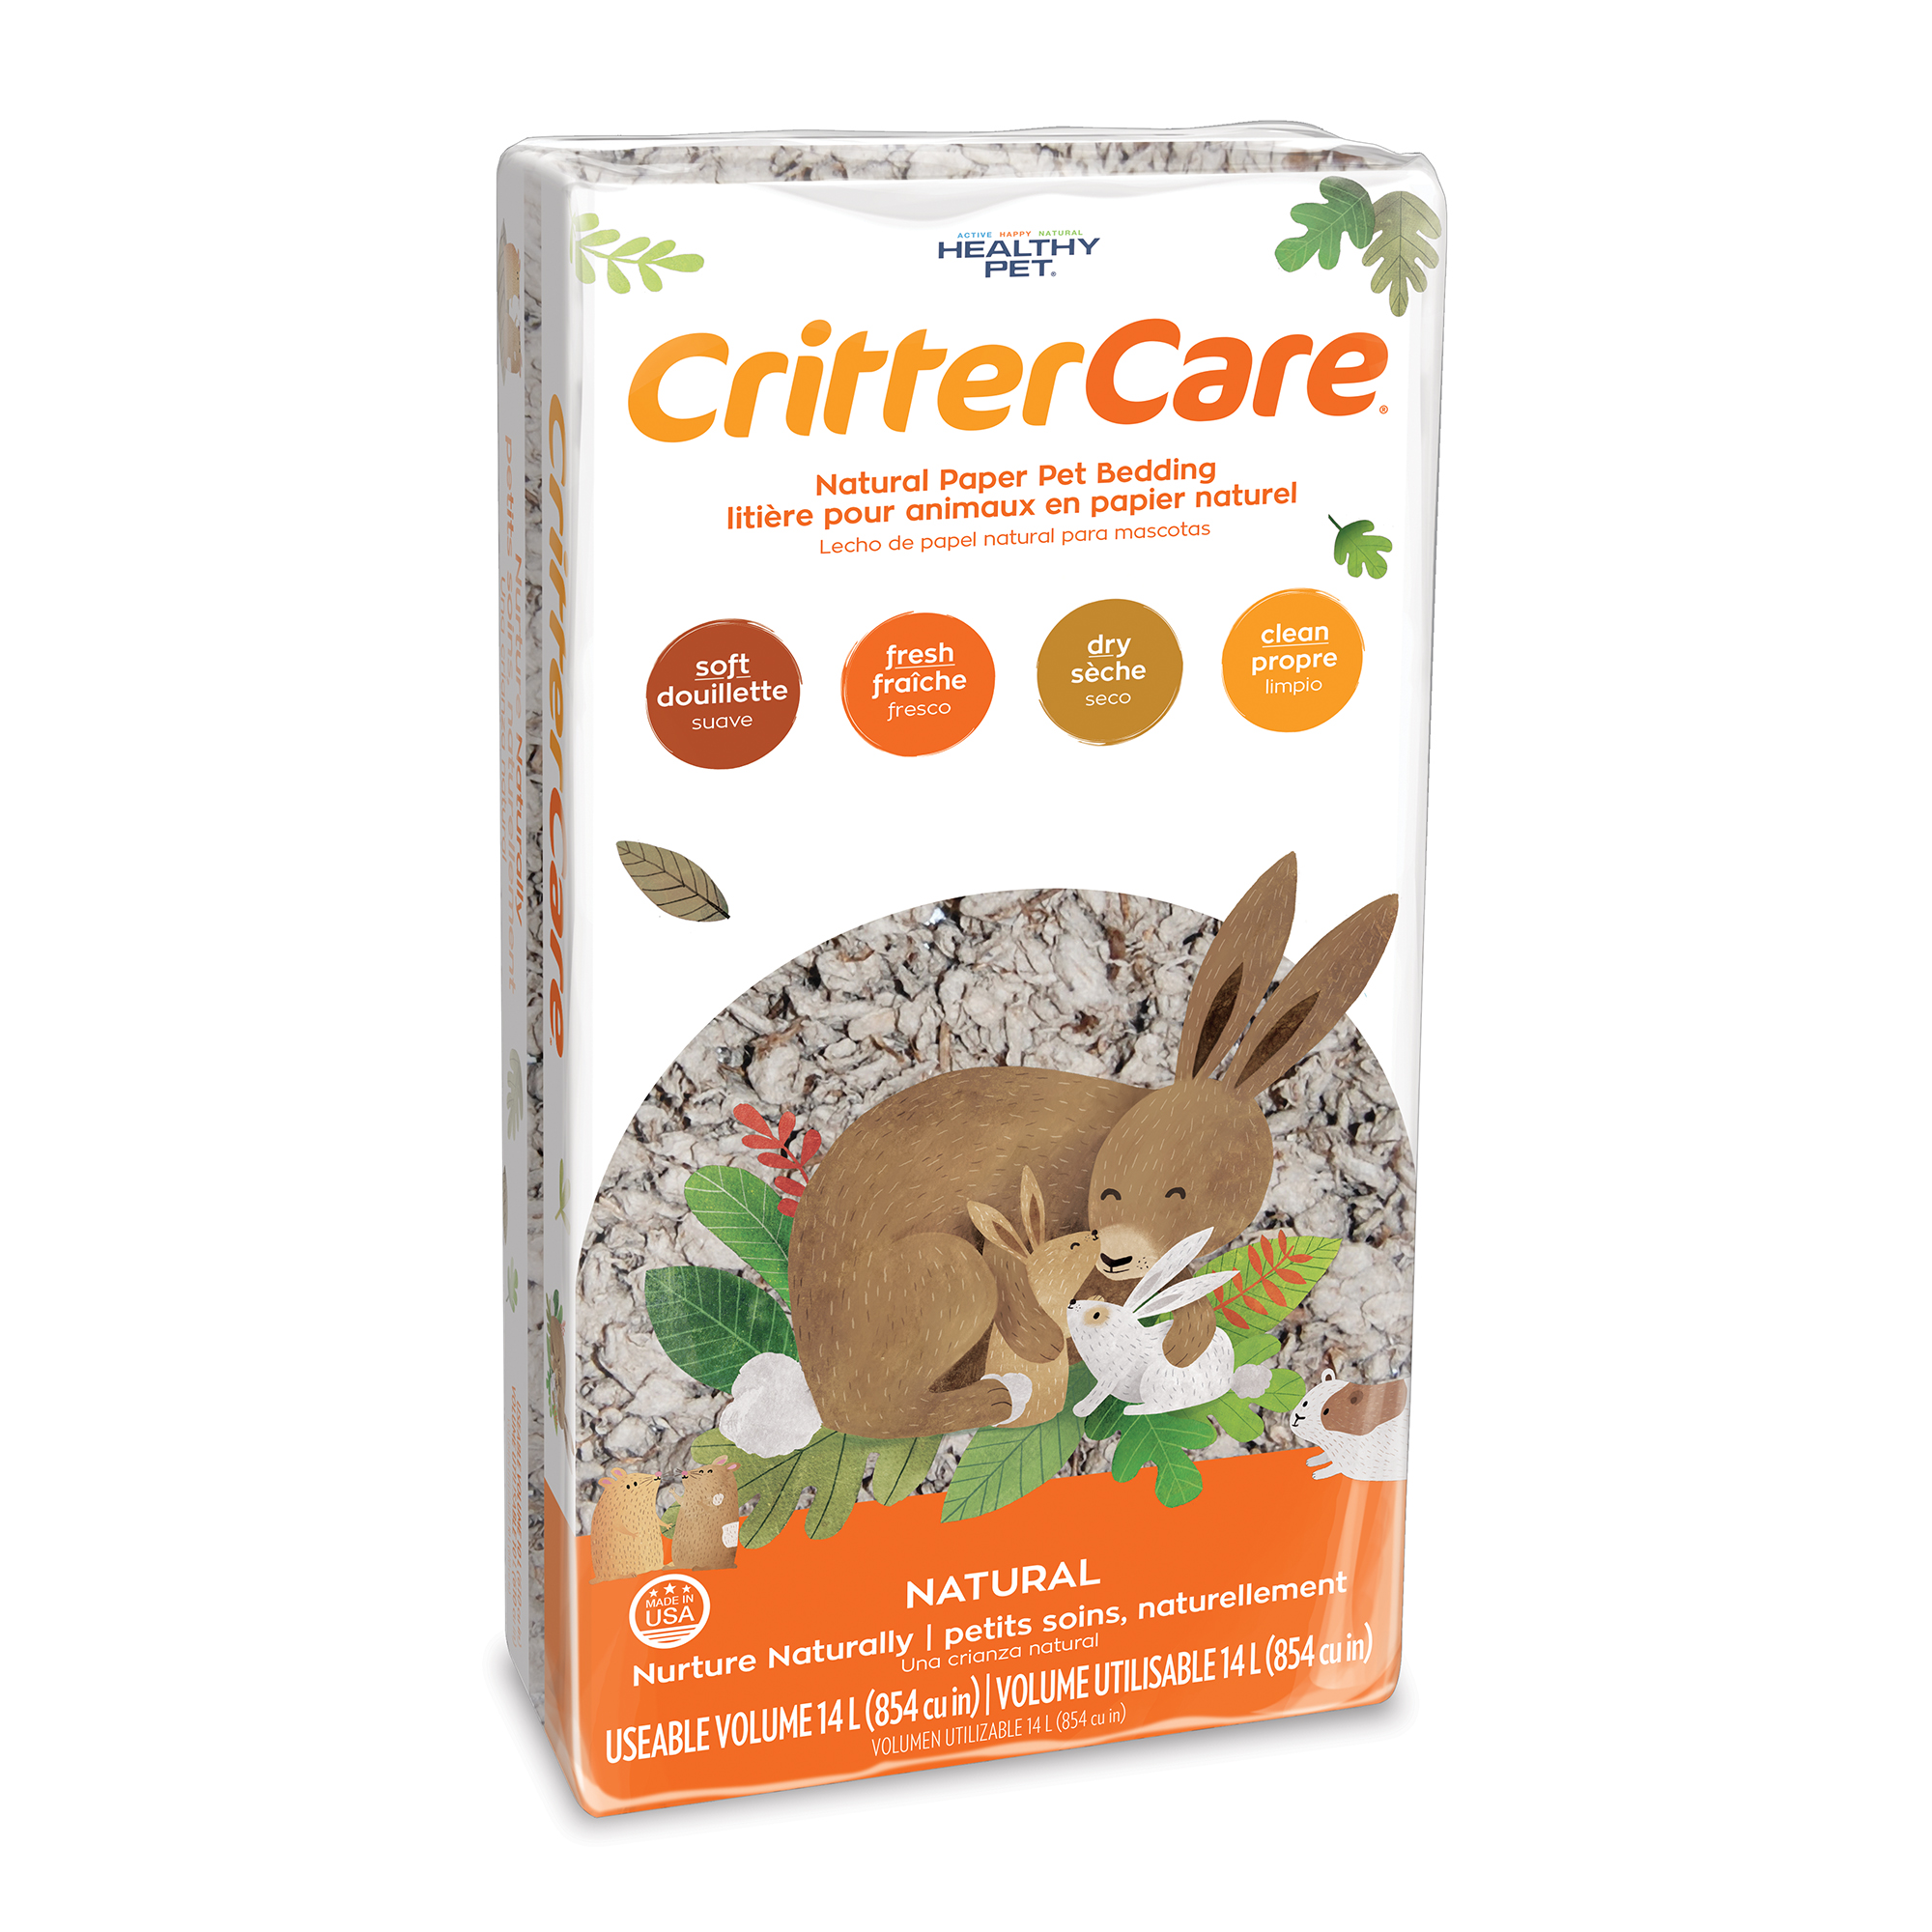 Crittercare Natural Paper Small Pet Bedding, 14 L - image 1 of 10